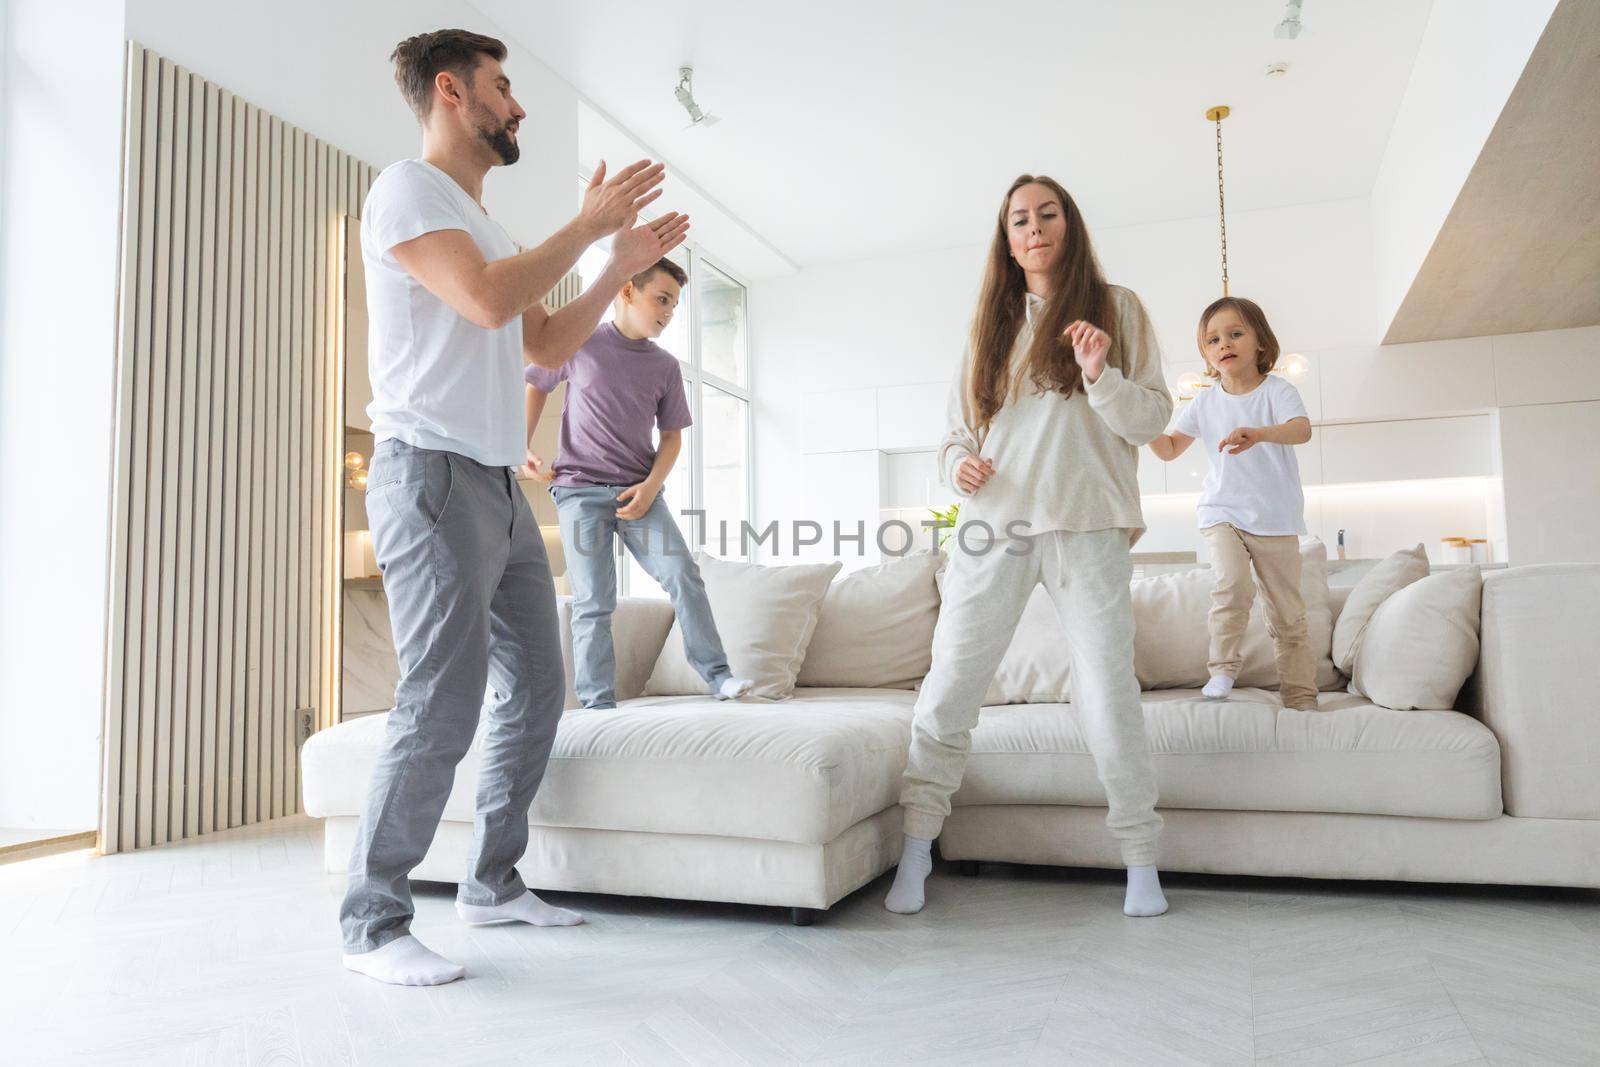 Funny active family of four young adult parents and cute small children dancing together in living room interior, carefree little kids with mum dad having fun laughing enjoy leisure at home